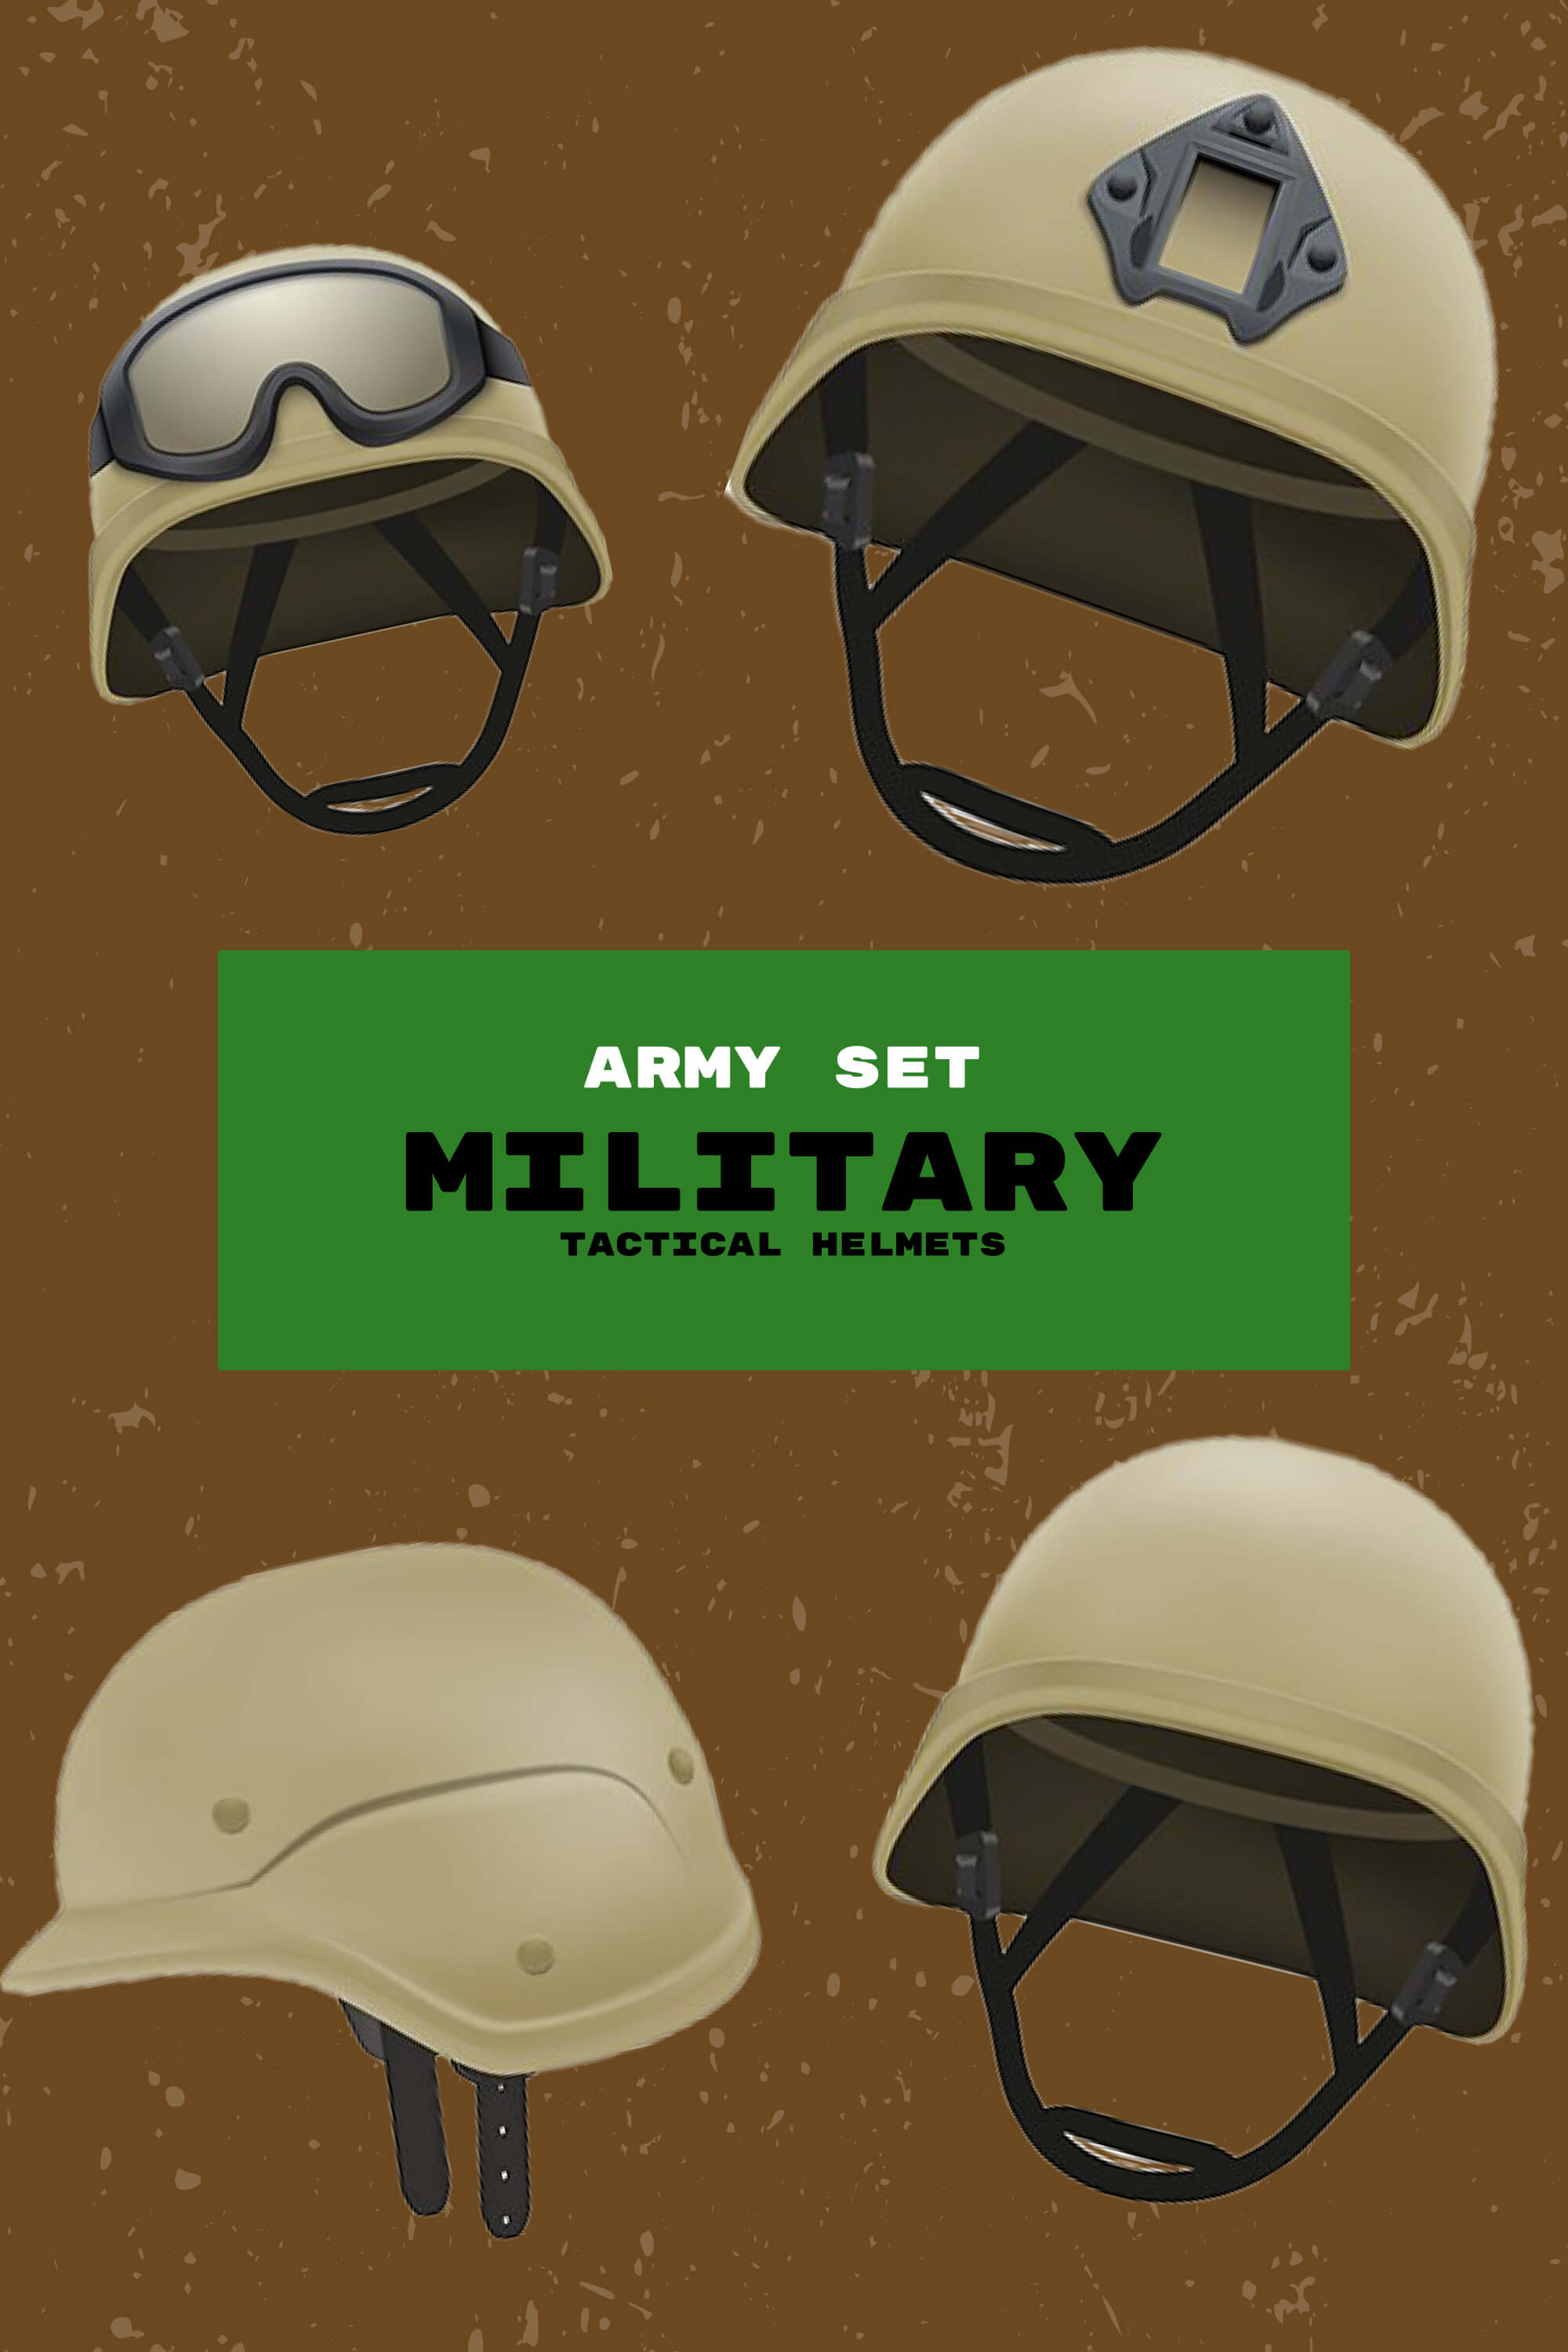 Military helmets with glasses on a brown background.